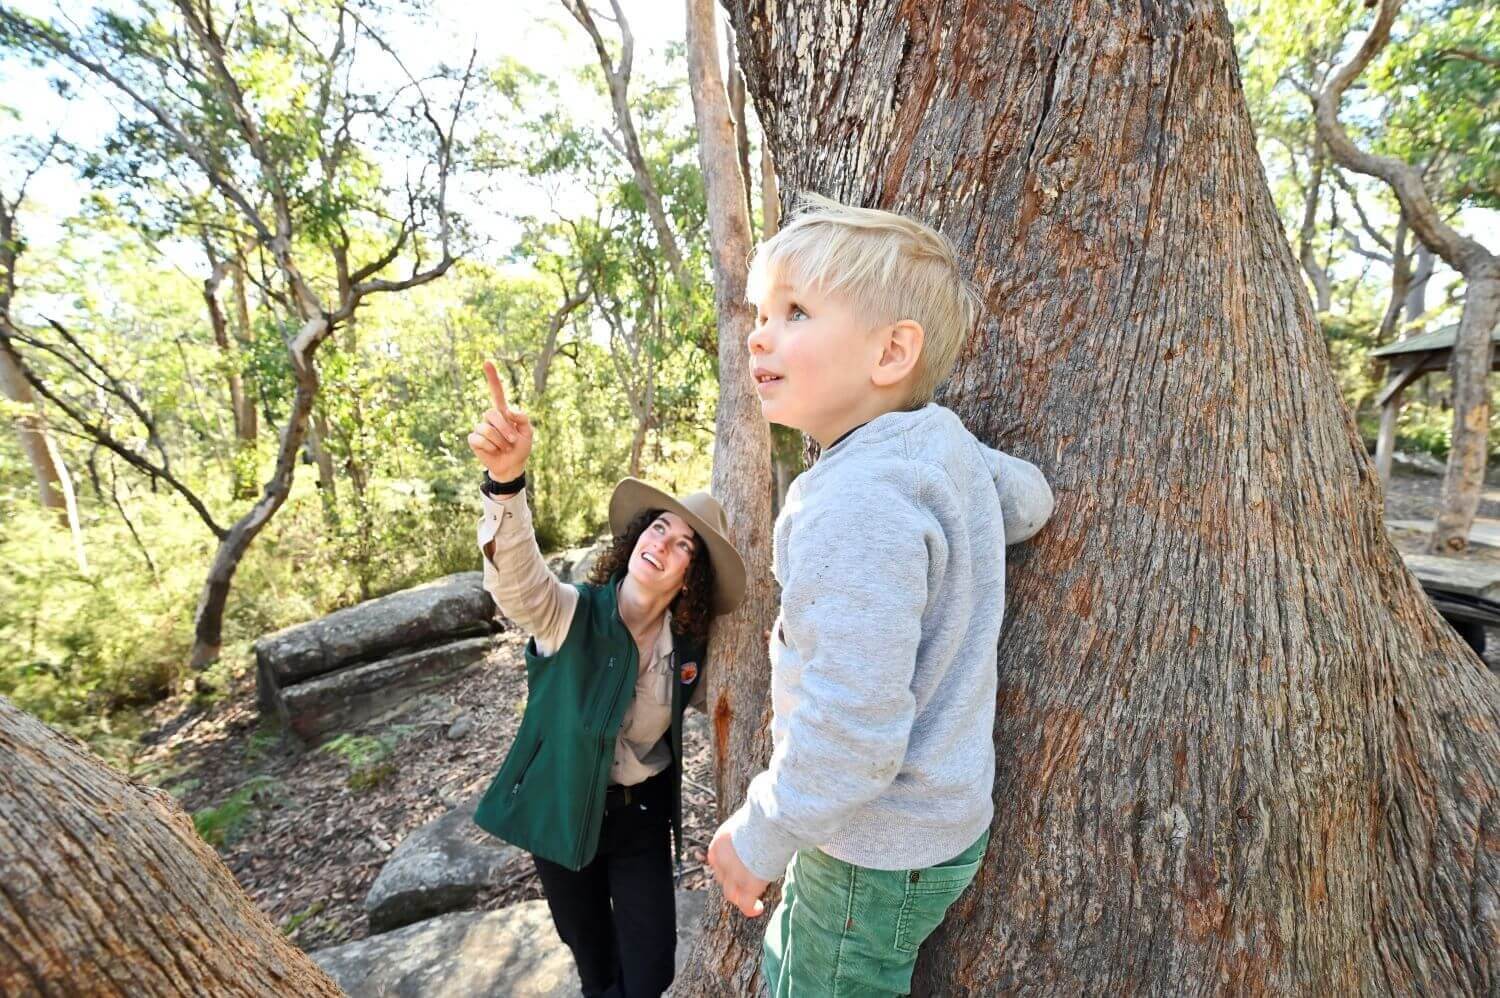 Ranger in bushland point and telling a young blond boy about the plants in the bushland